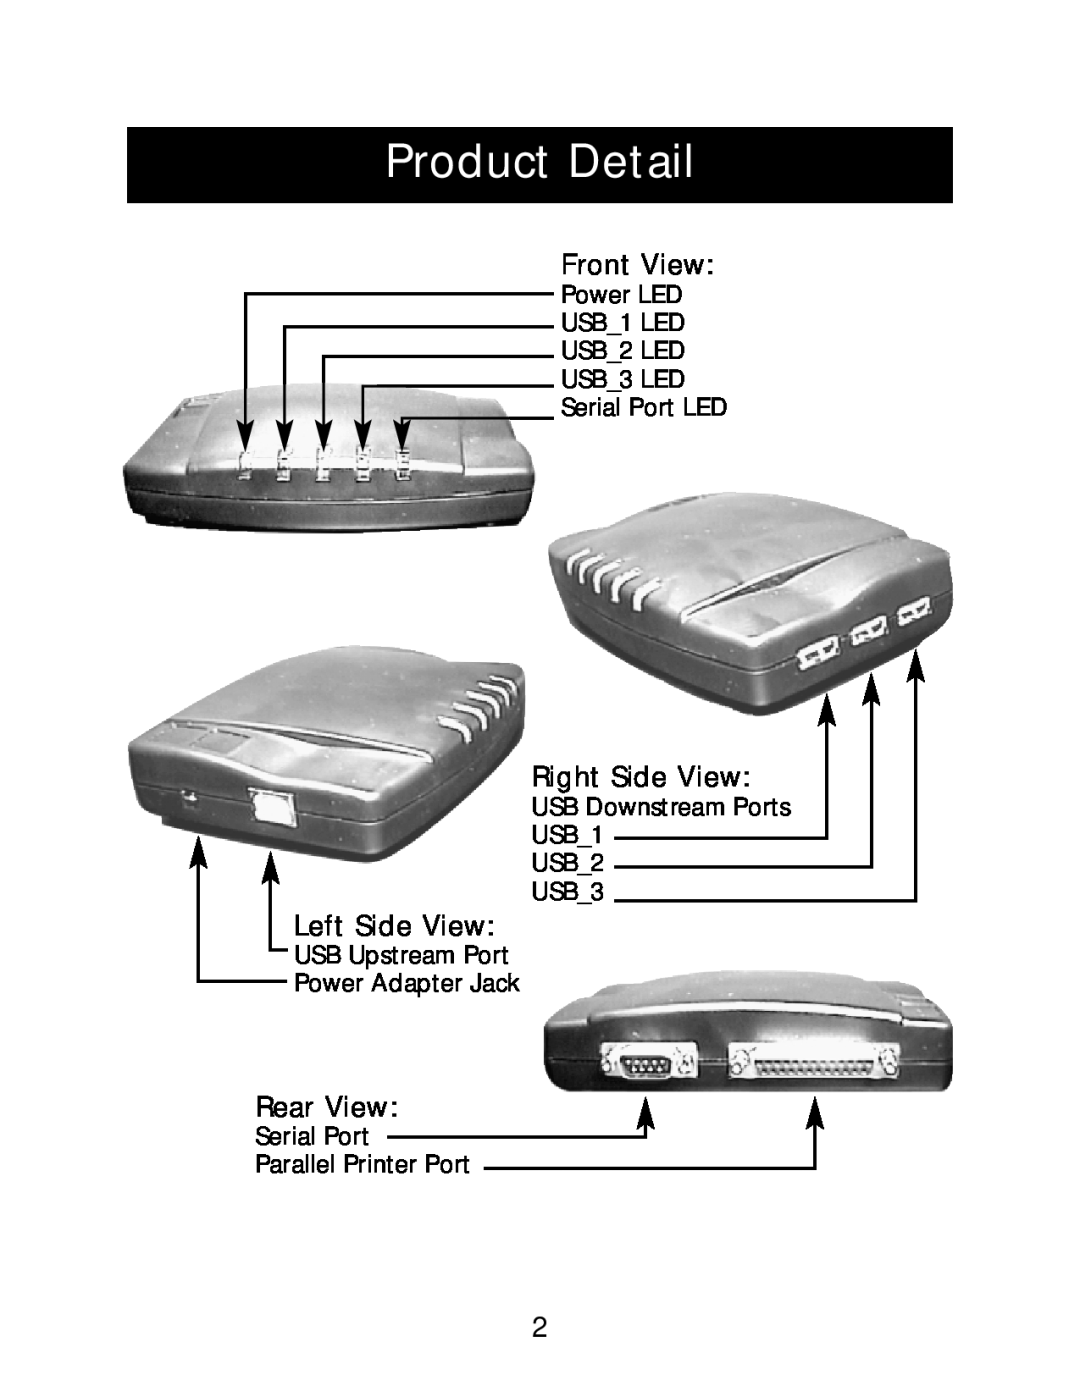 Belkin P73213-A user manual Product Detail, Power LED USB1 LED USB2 LED USB3 LED Serial Port LED, USB Downstream Ports 